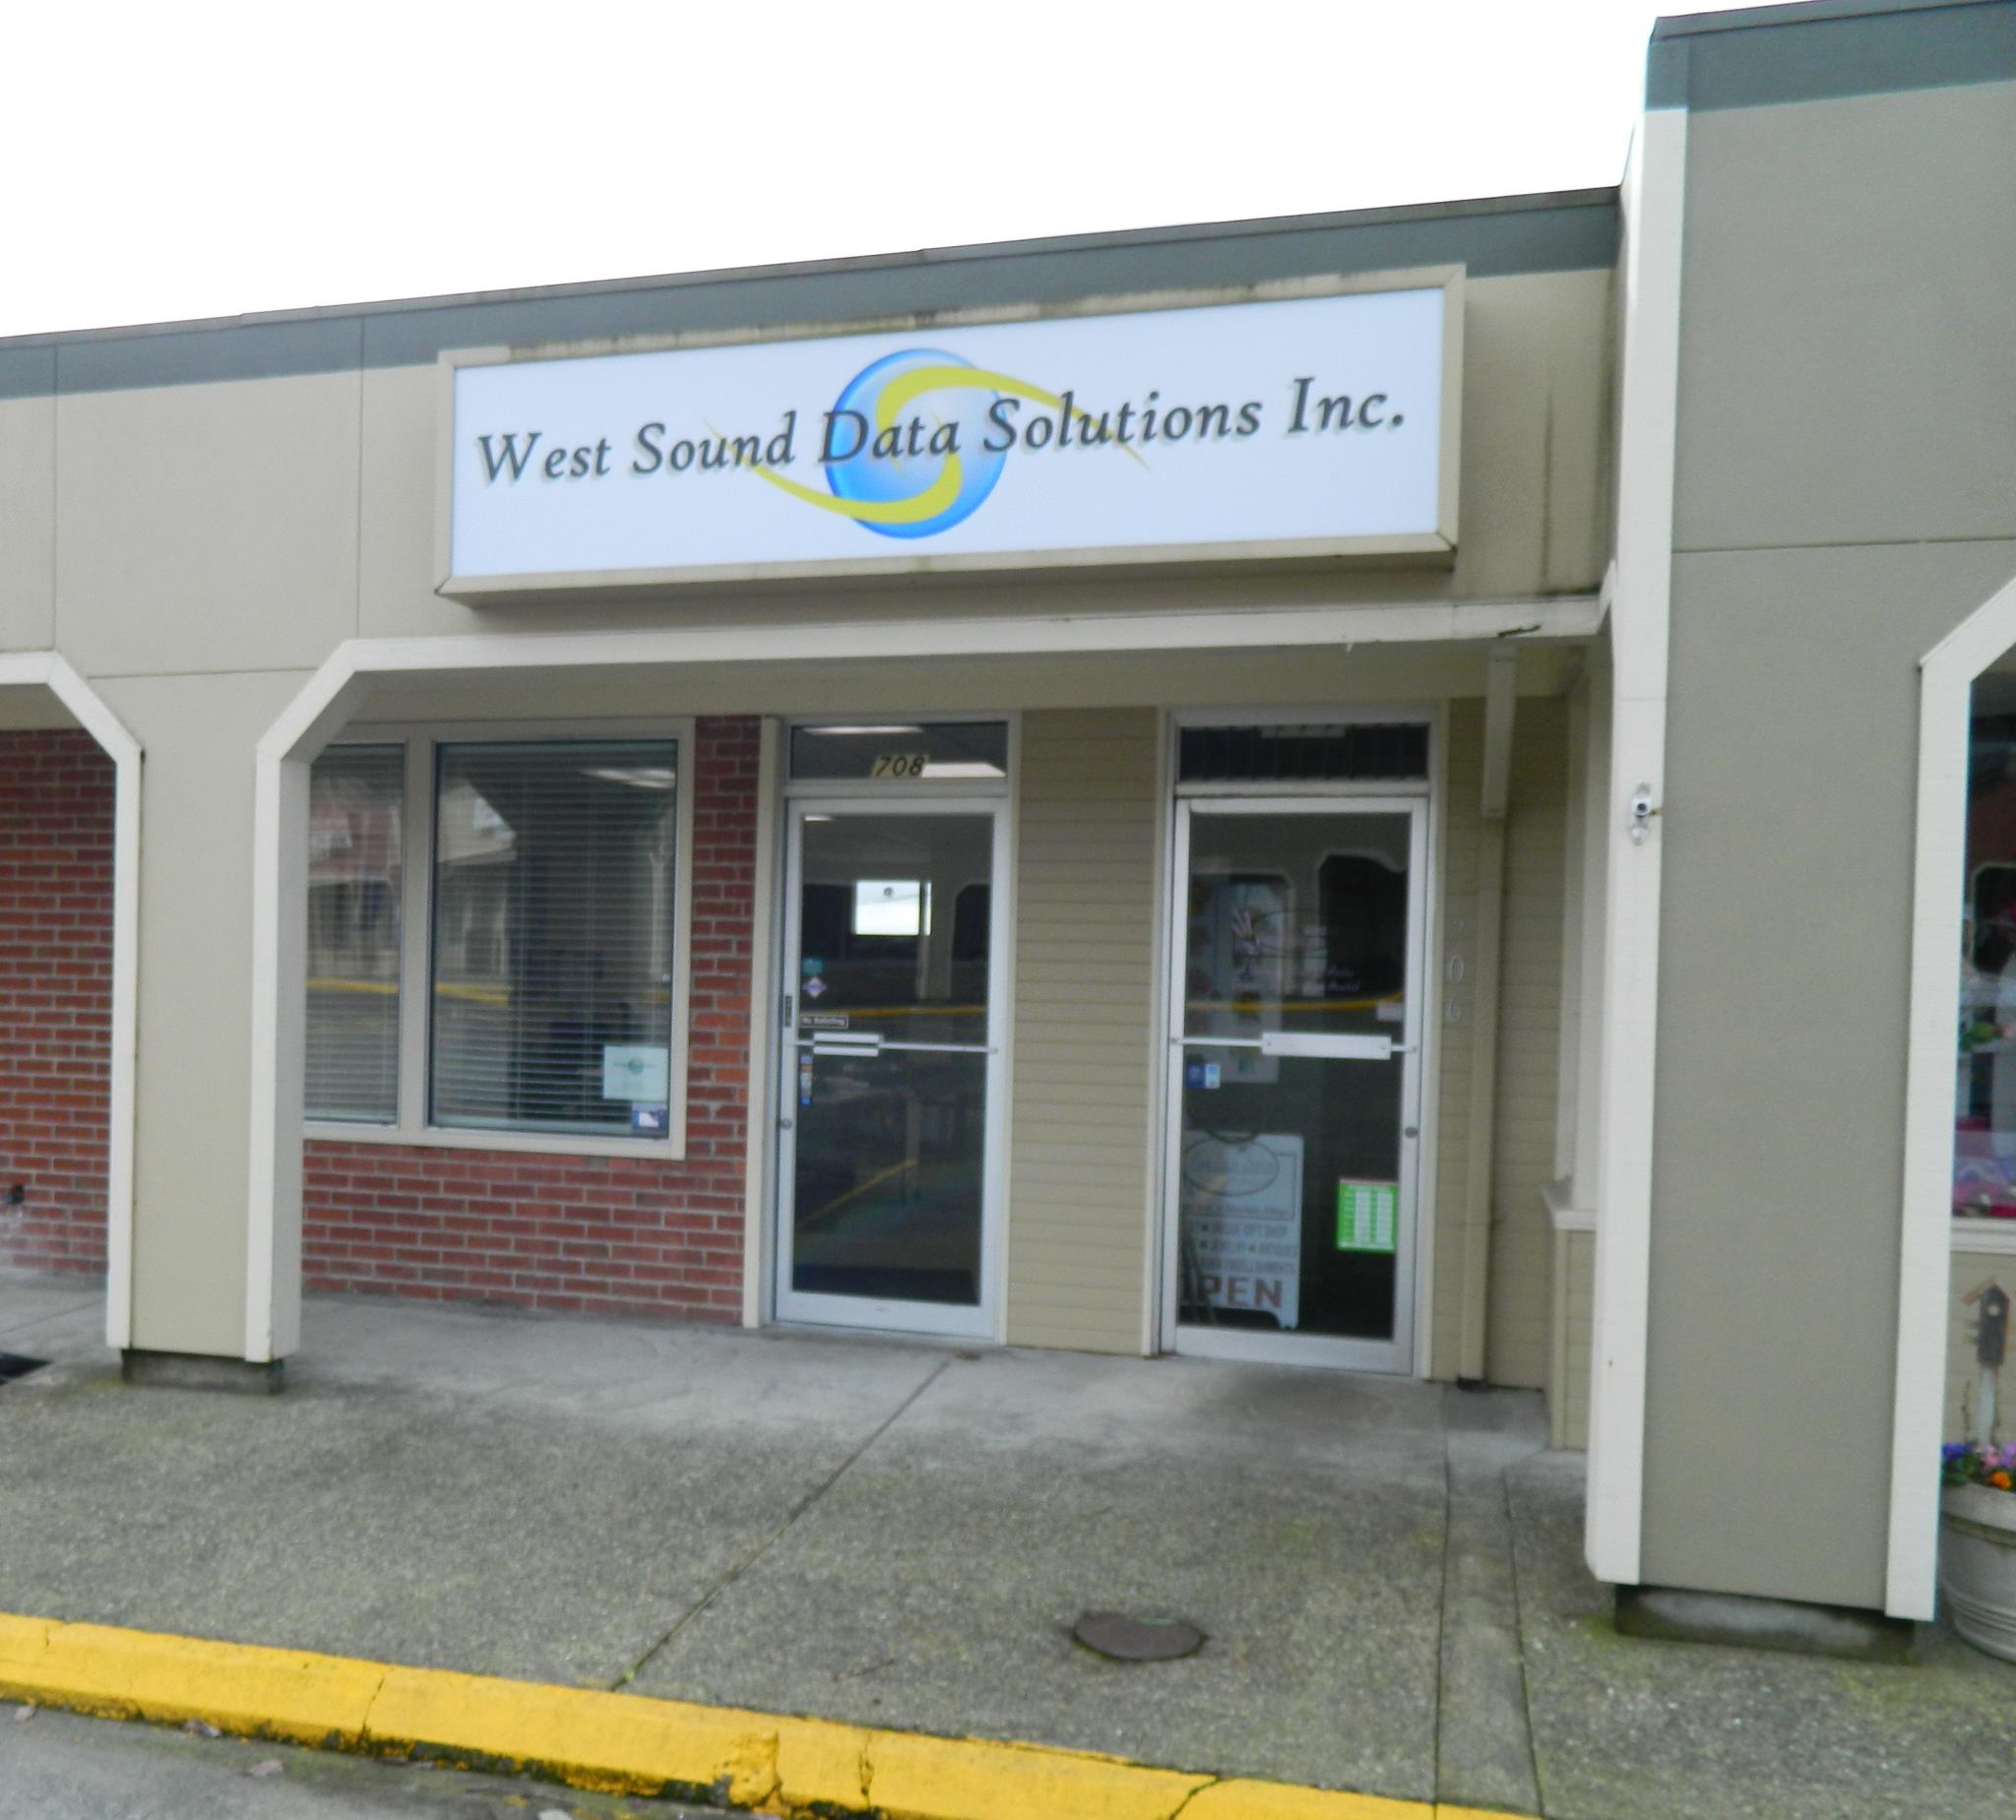 West Sound Data Solutions Inc.